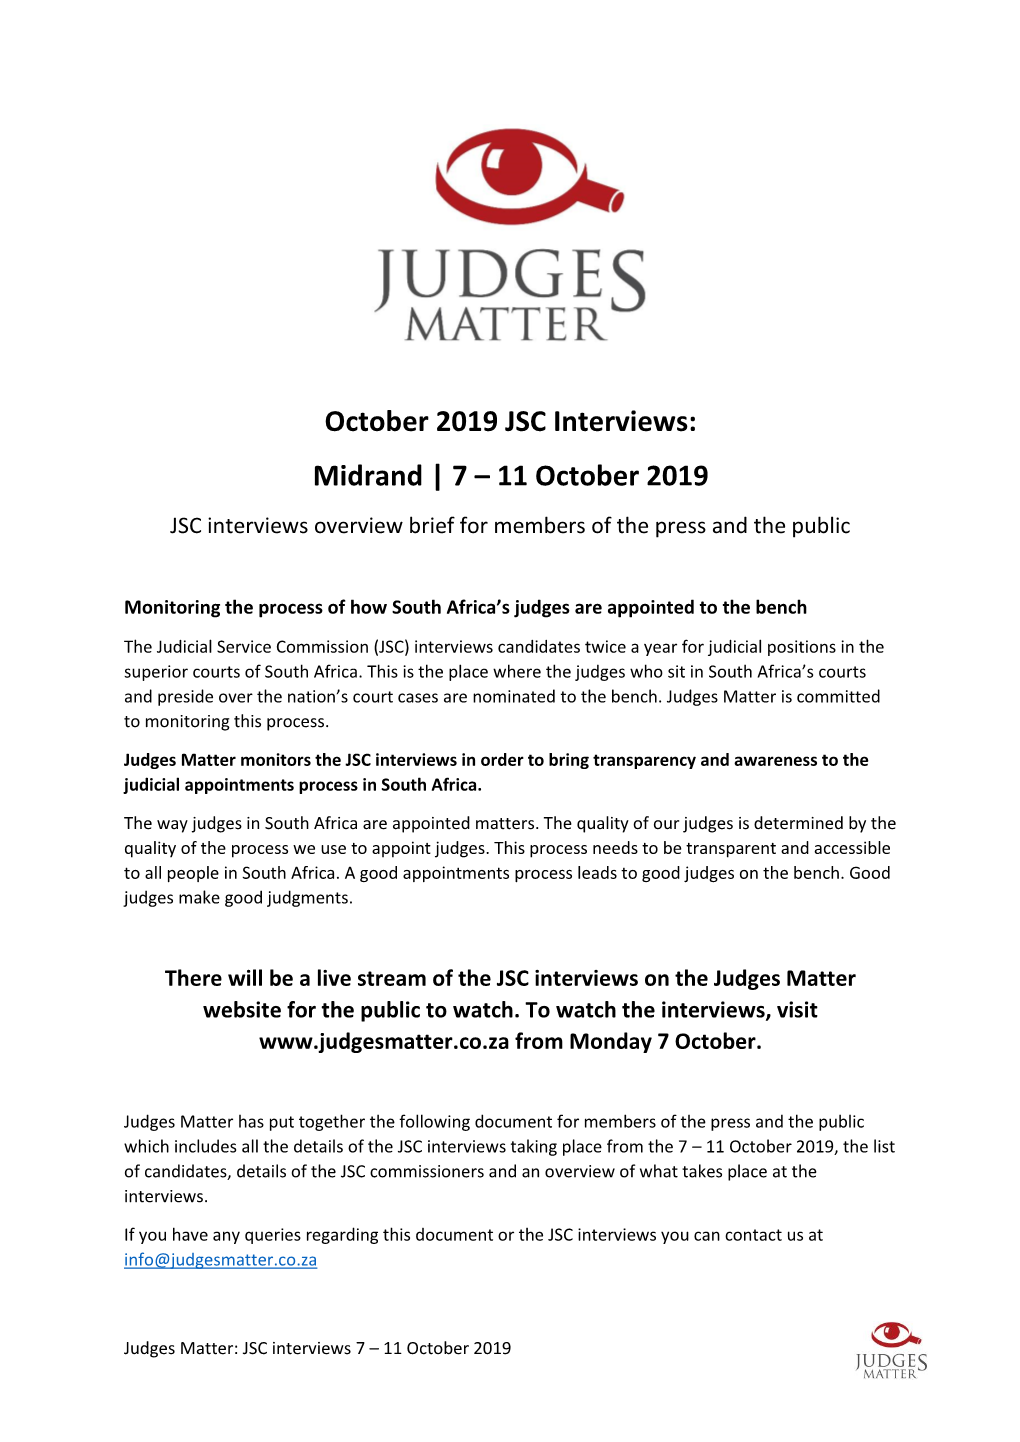 October 2019 JSC Interviews: Midrand | 7 – 11 October 2019 JSC Interviews Overview Brief for Members of the Press and the Public